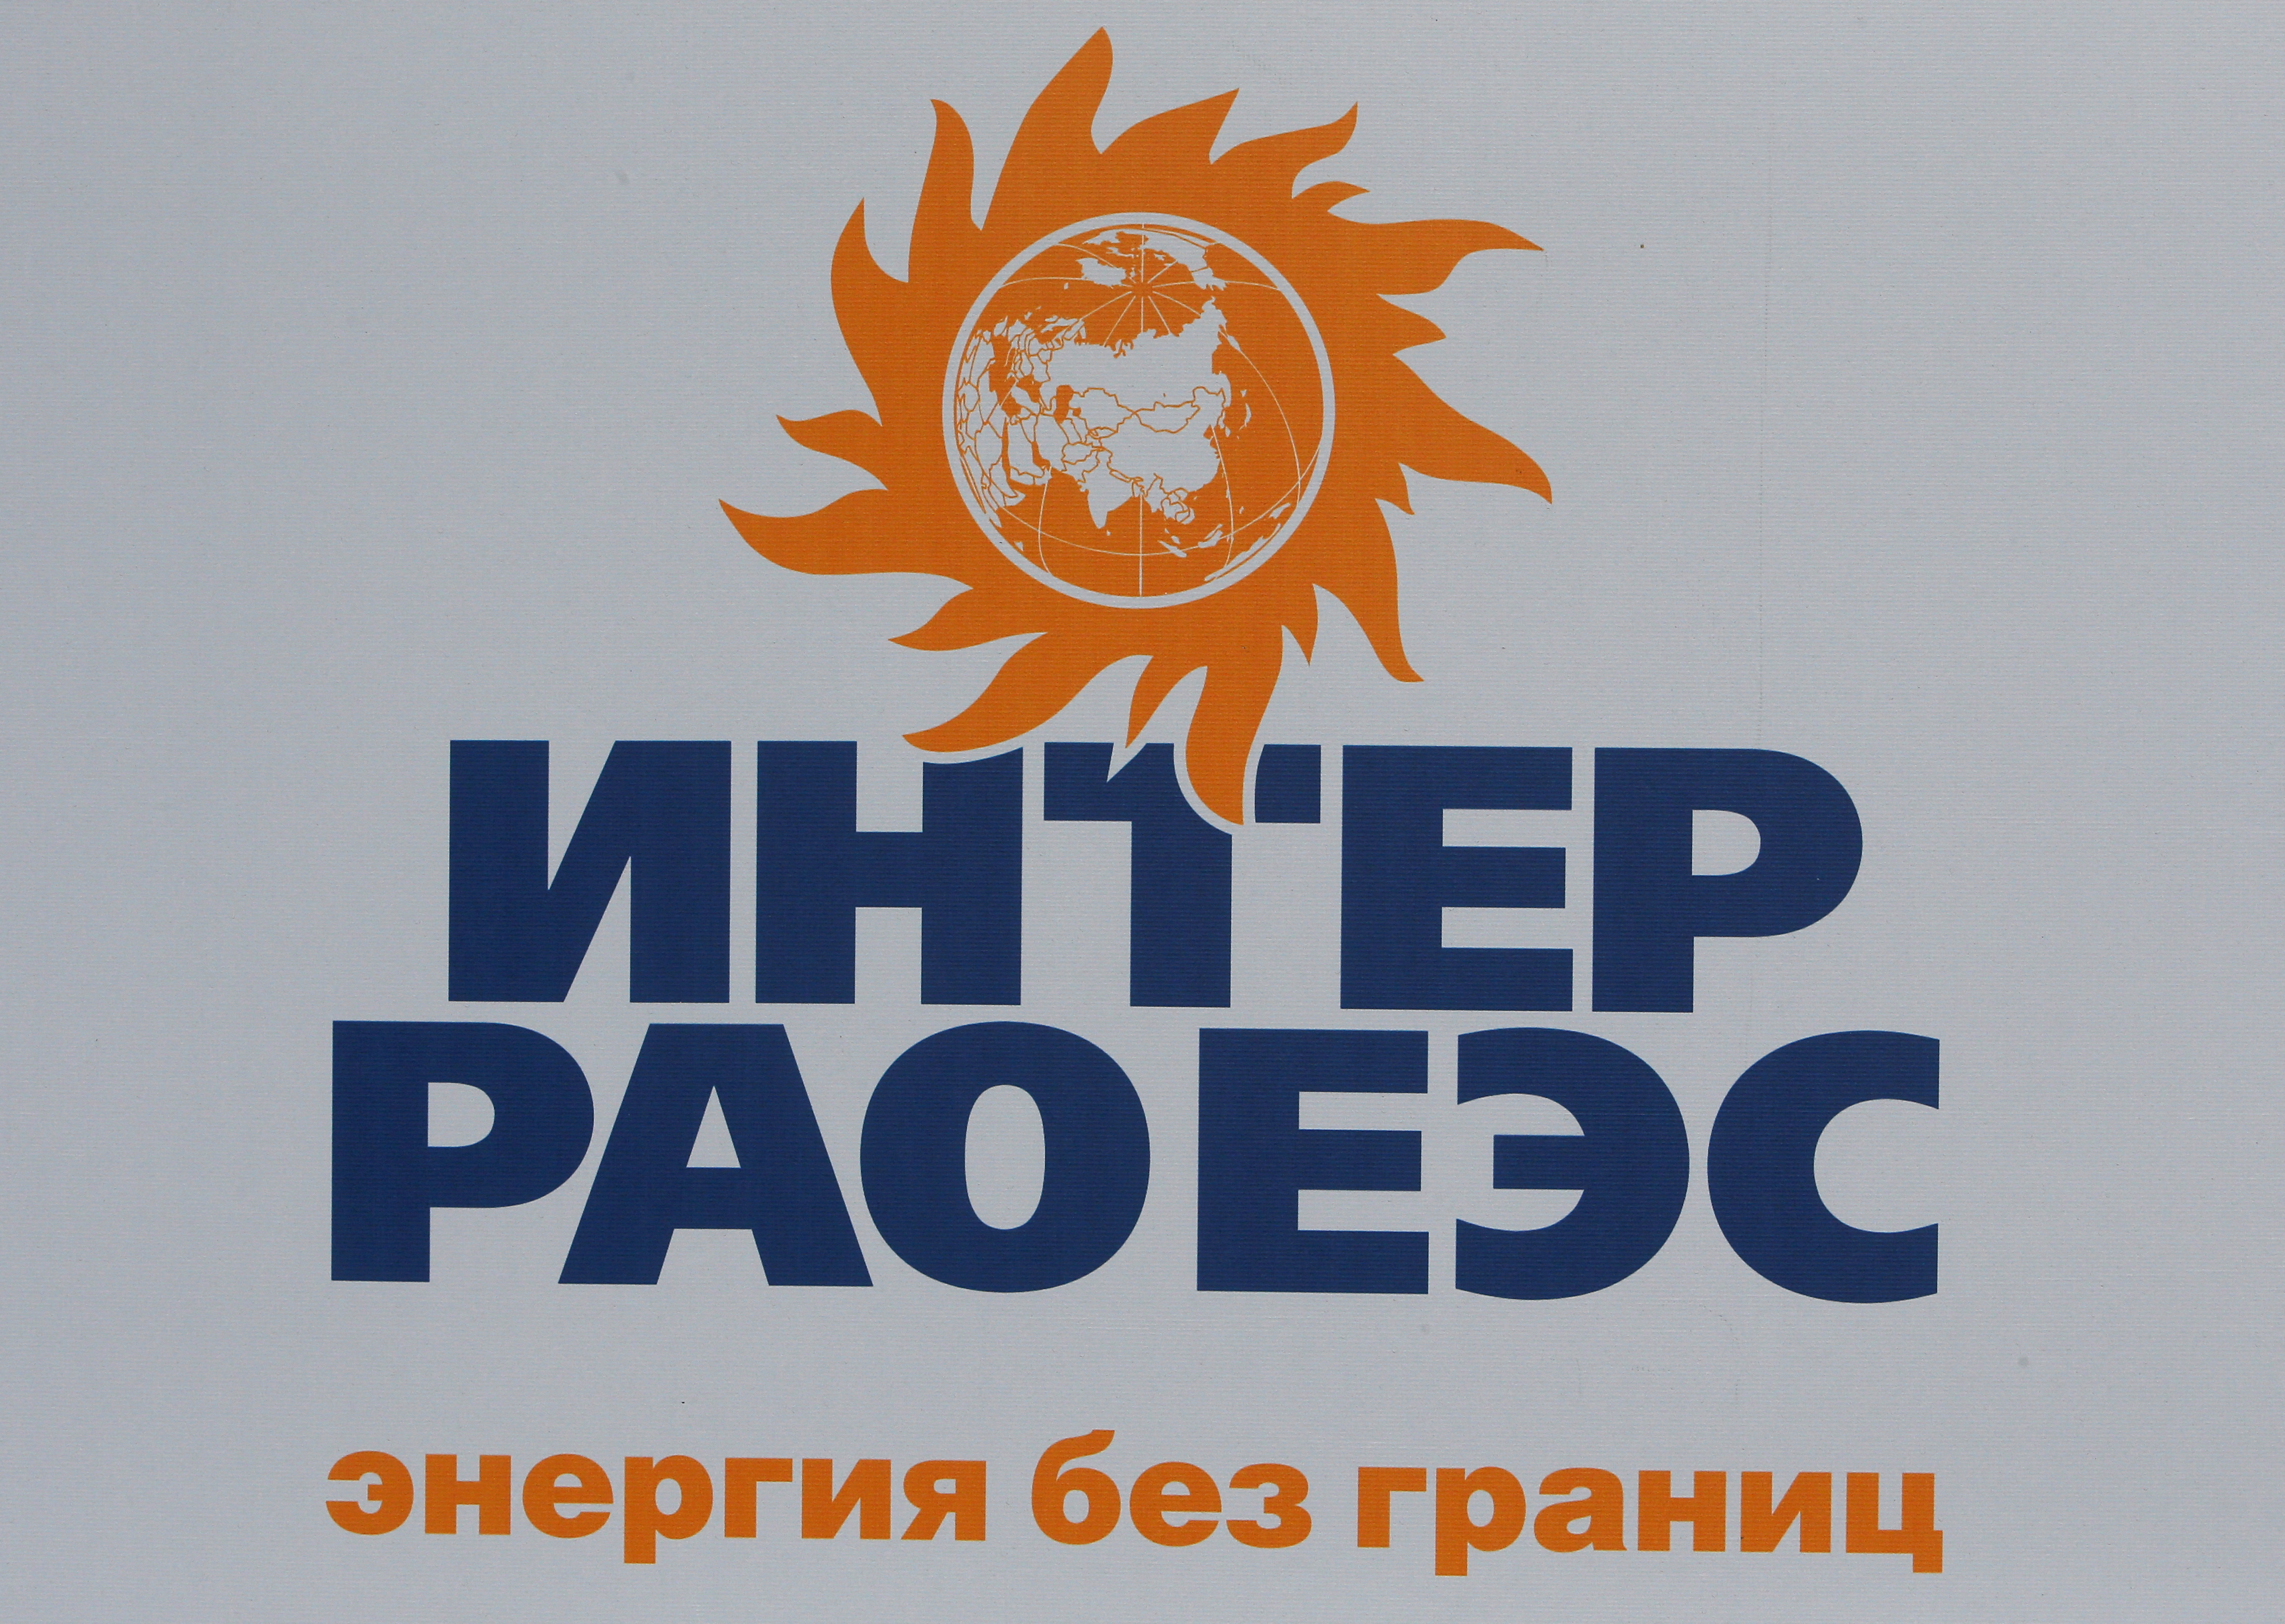 The logo of Russian energy company Inter RAO UES is seen on a board at the SPIEF 2017 in St. Petersburg